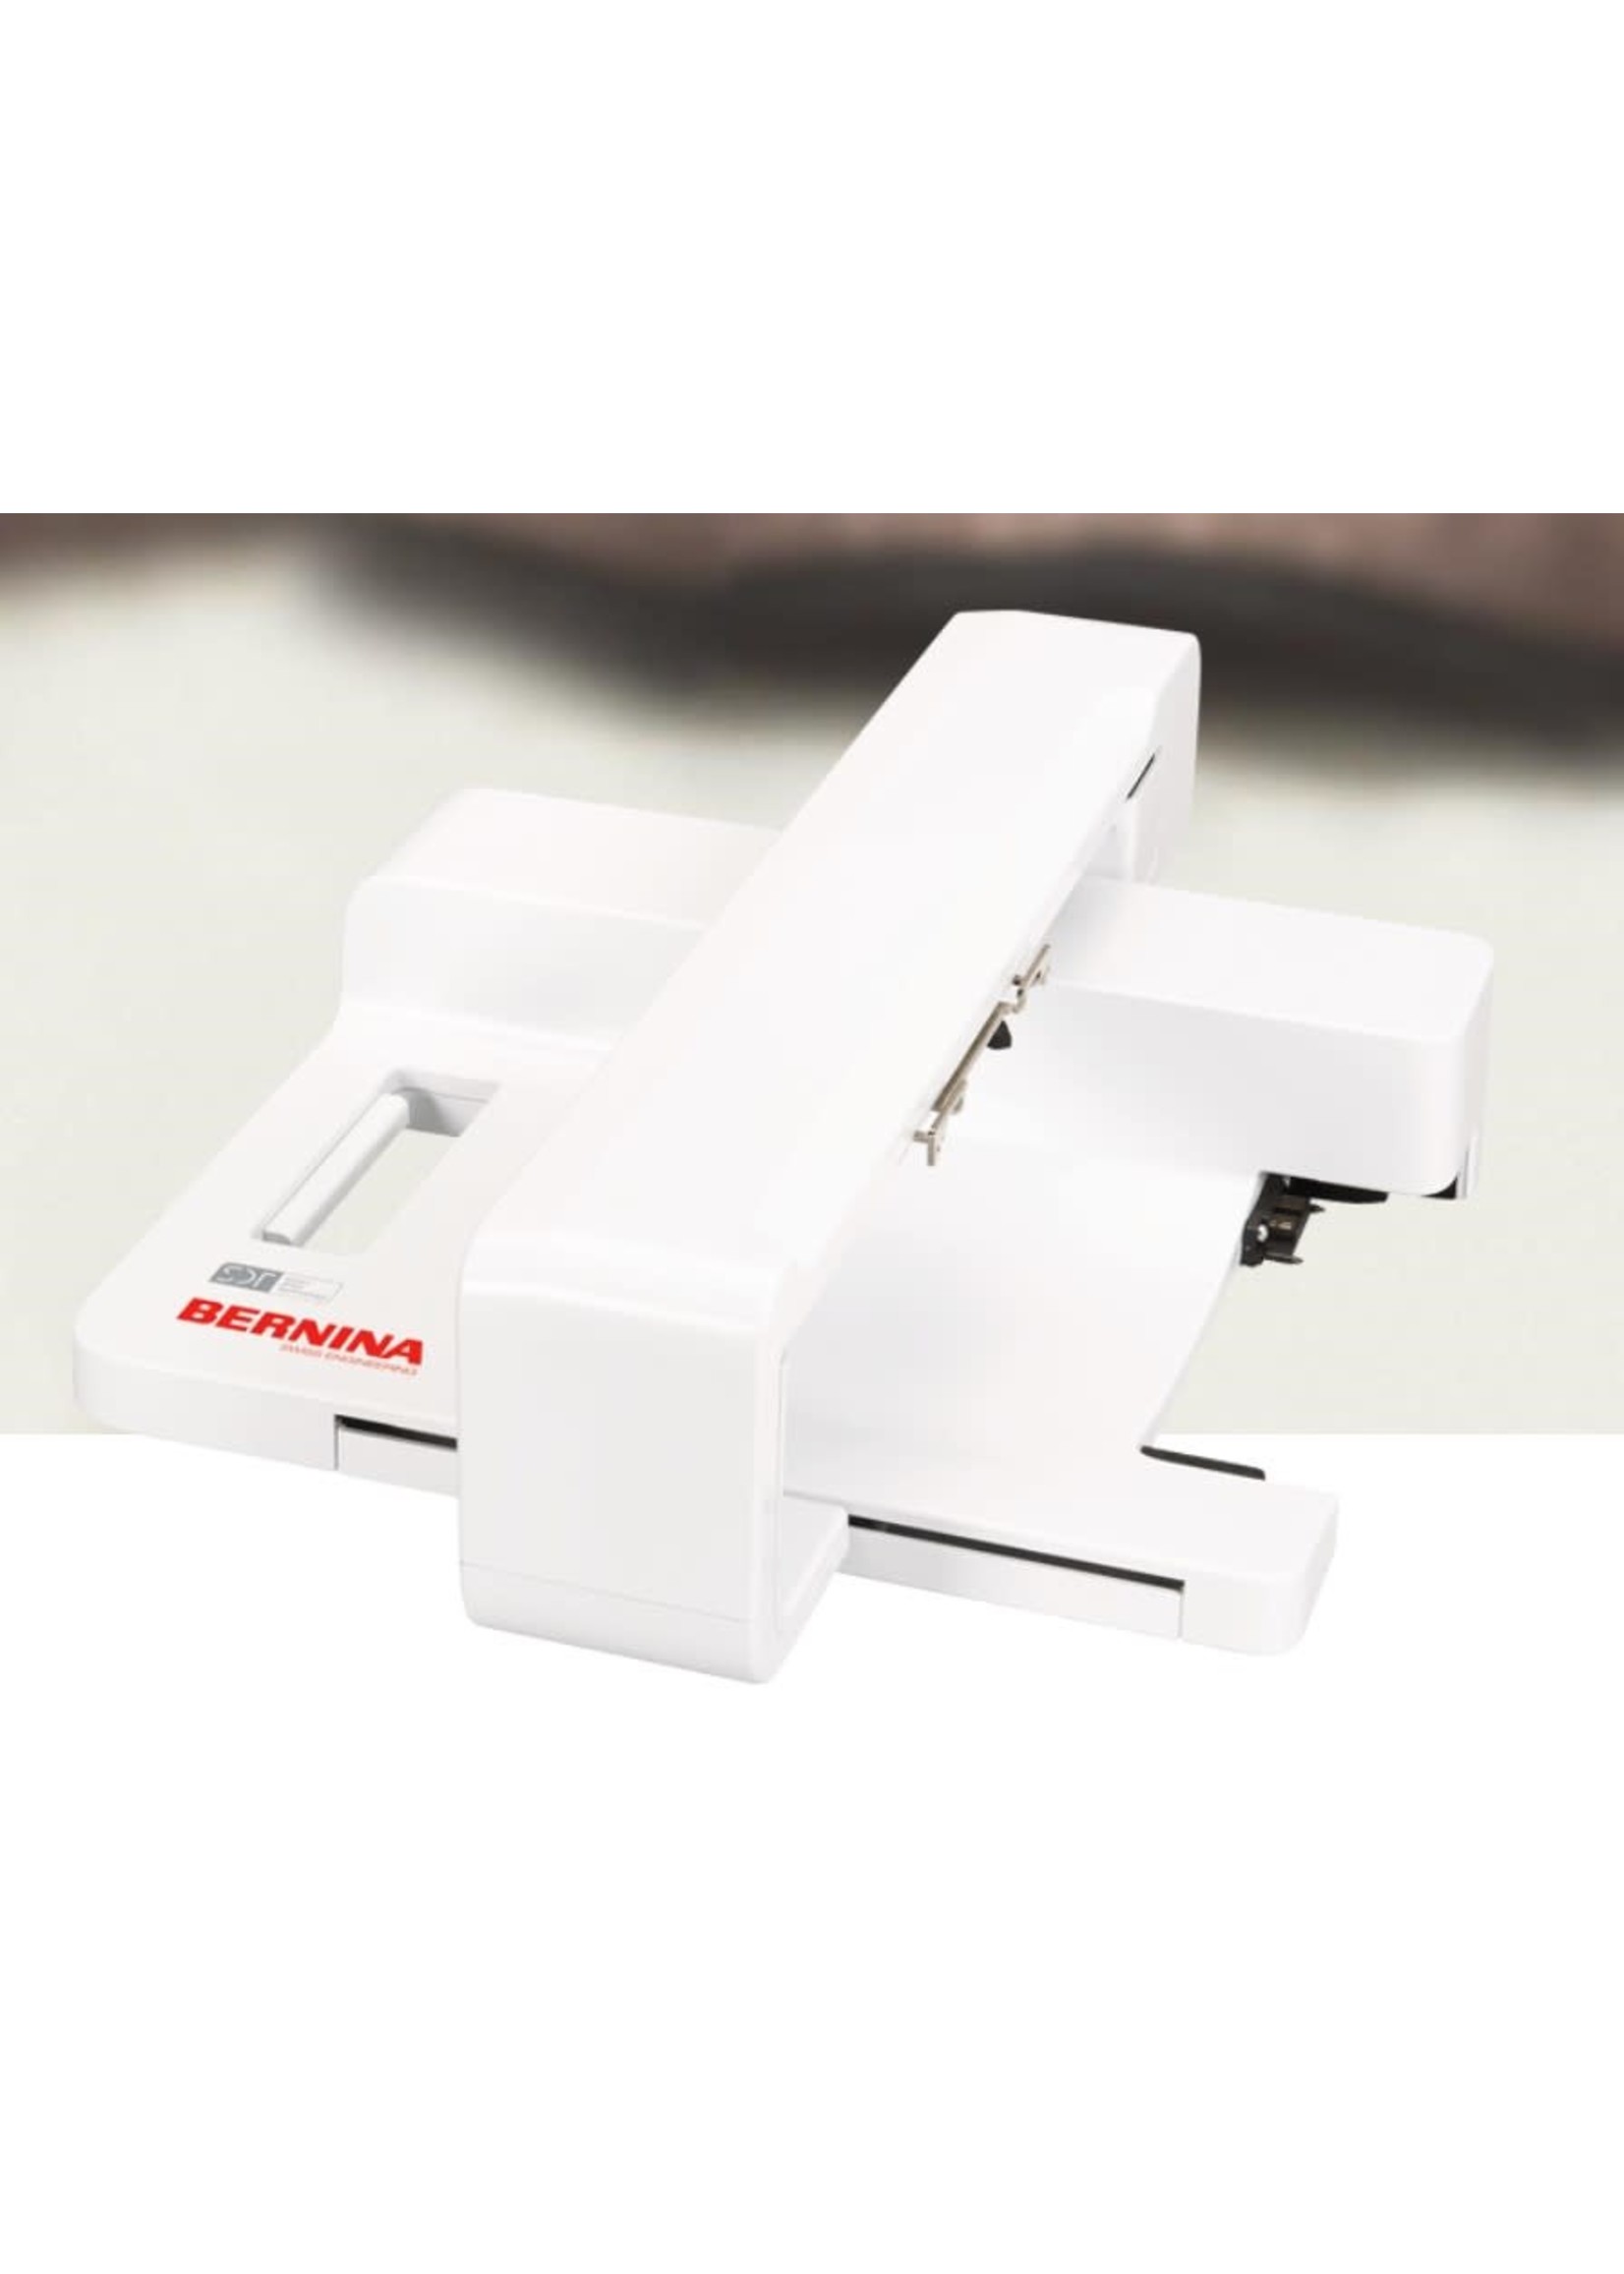 Bernina Bernina Embroidery Module M (SDT) -AVAILABLE FOR IN-STORE PURCHASE ONLY